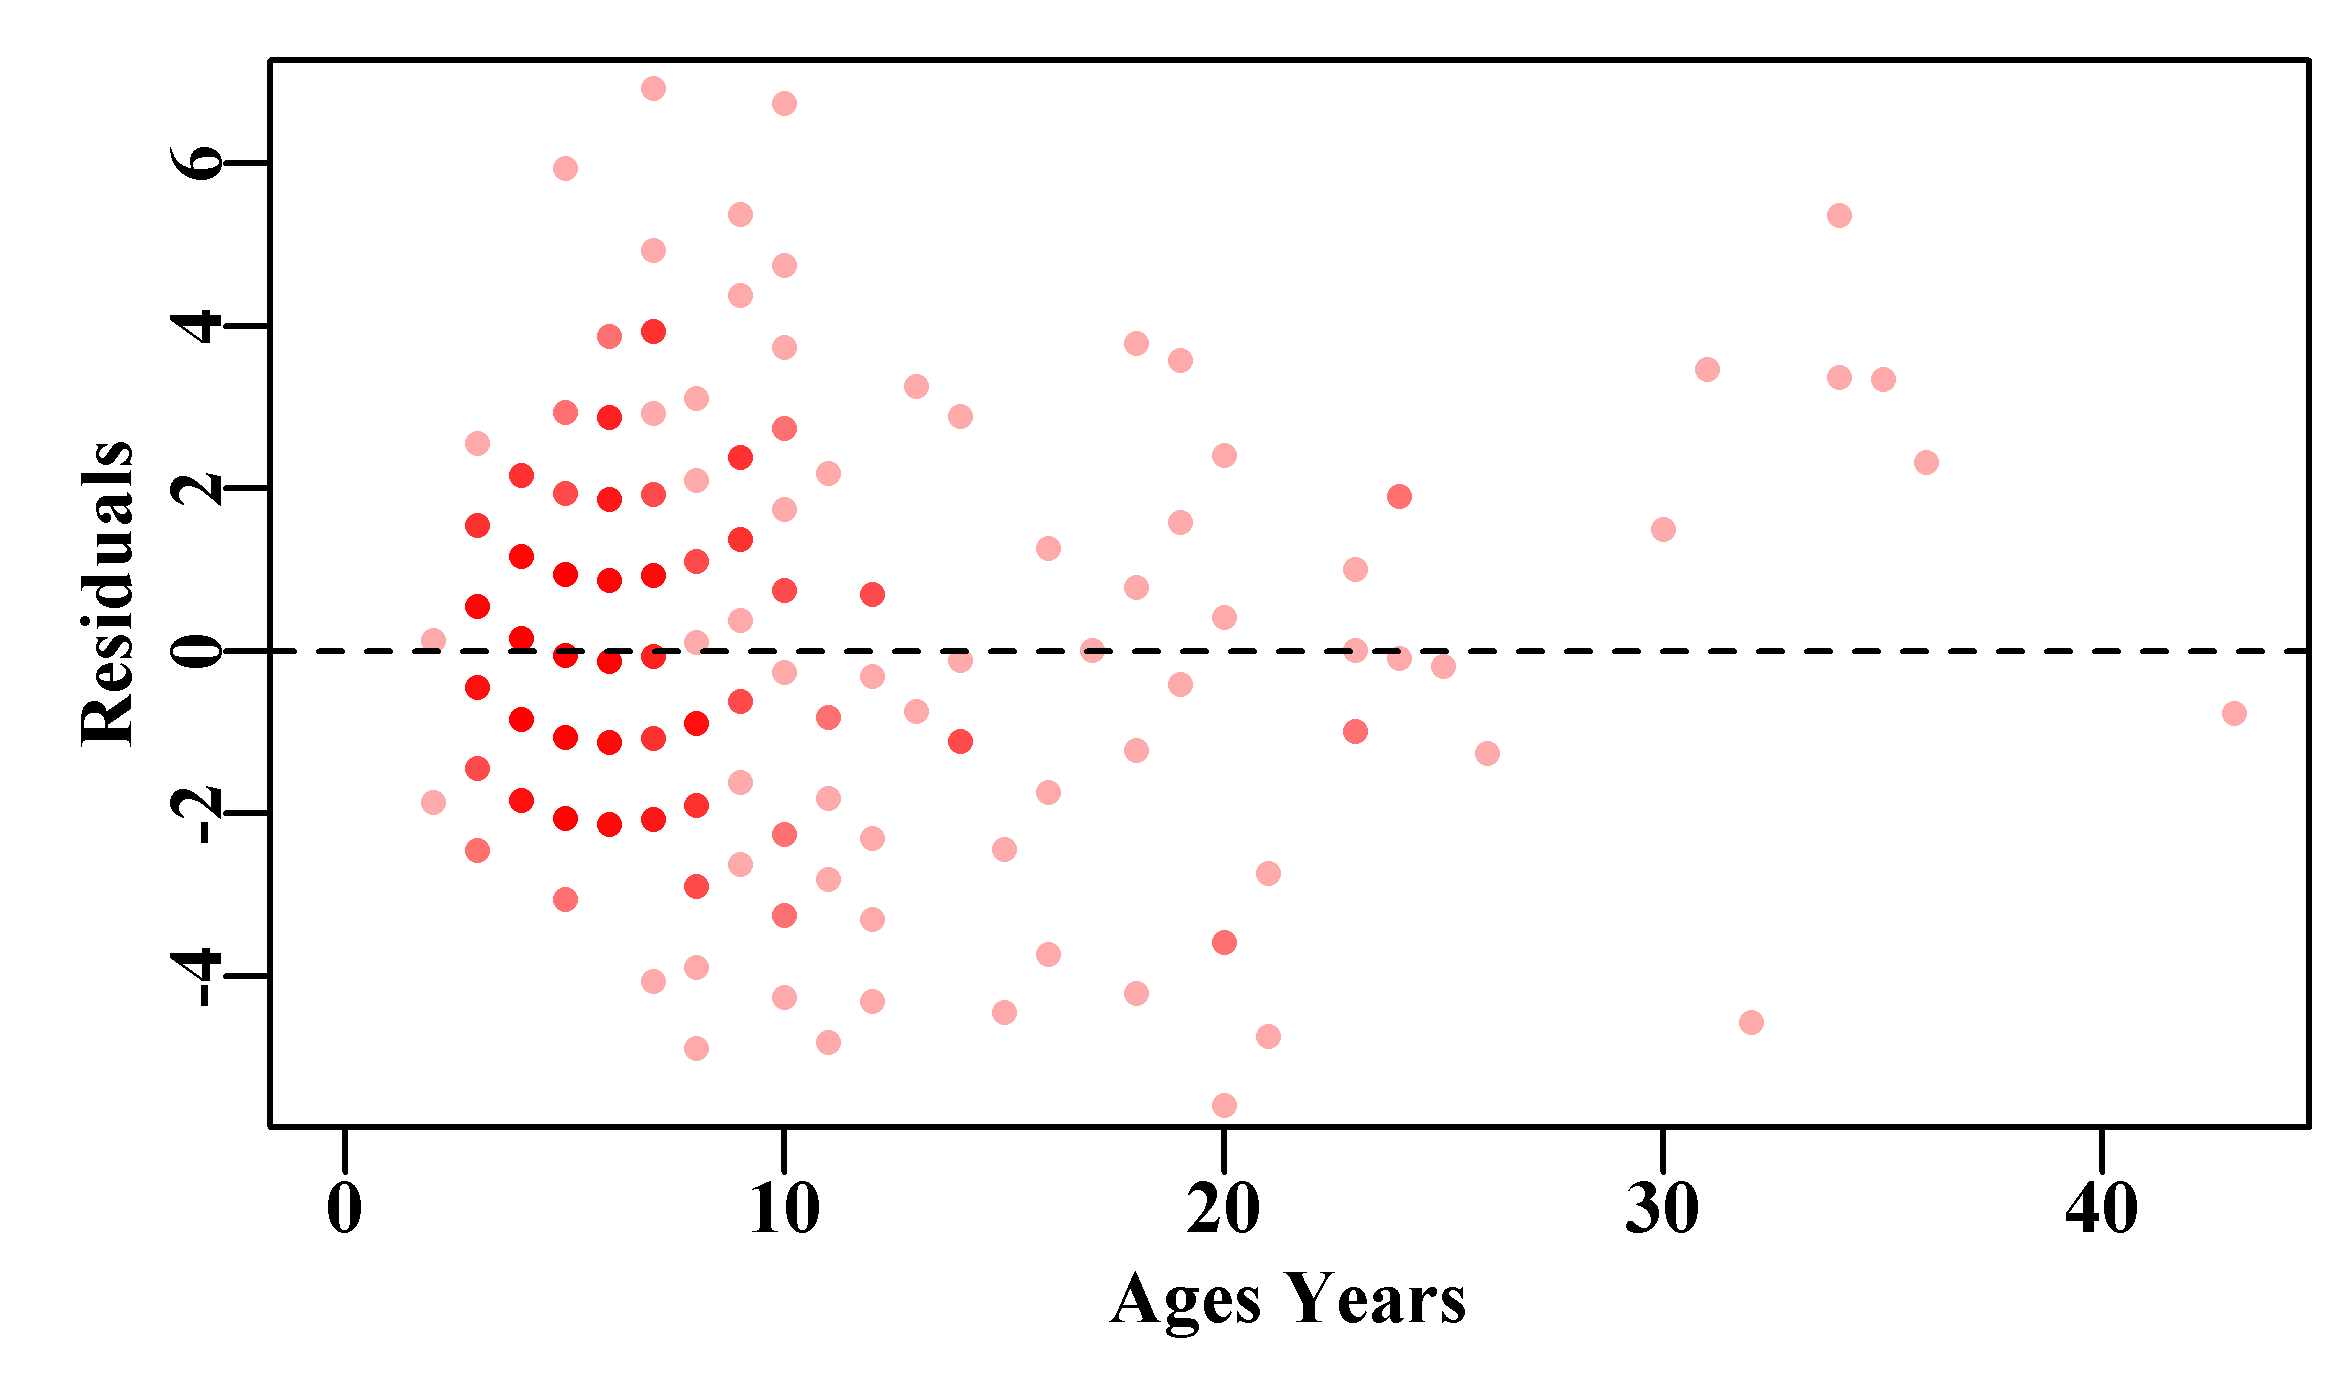 The residual values for von Bertalanffy curve fitted to the female LatA data. There is a clear pattern between the ages of 3 - 10, which reflects the nature of residuals when the mean expected length for a given age is constant and compared to these rounded length measurements.